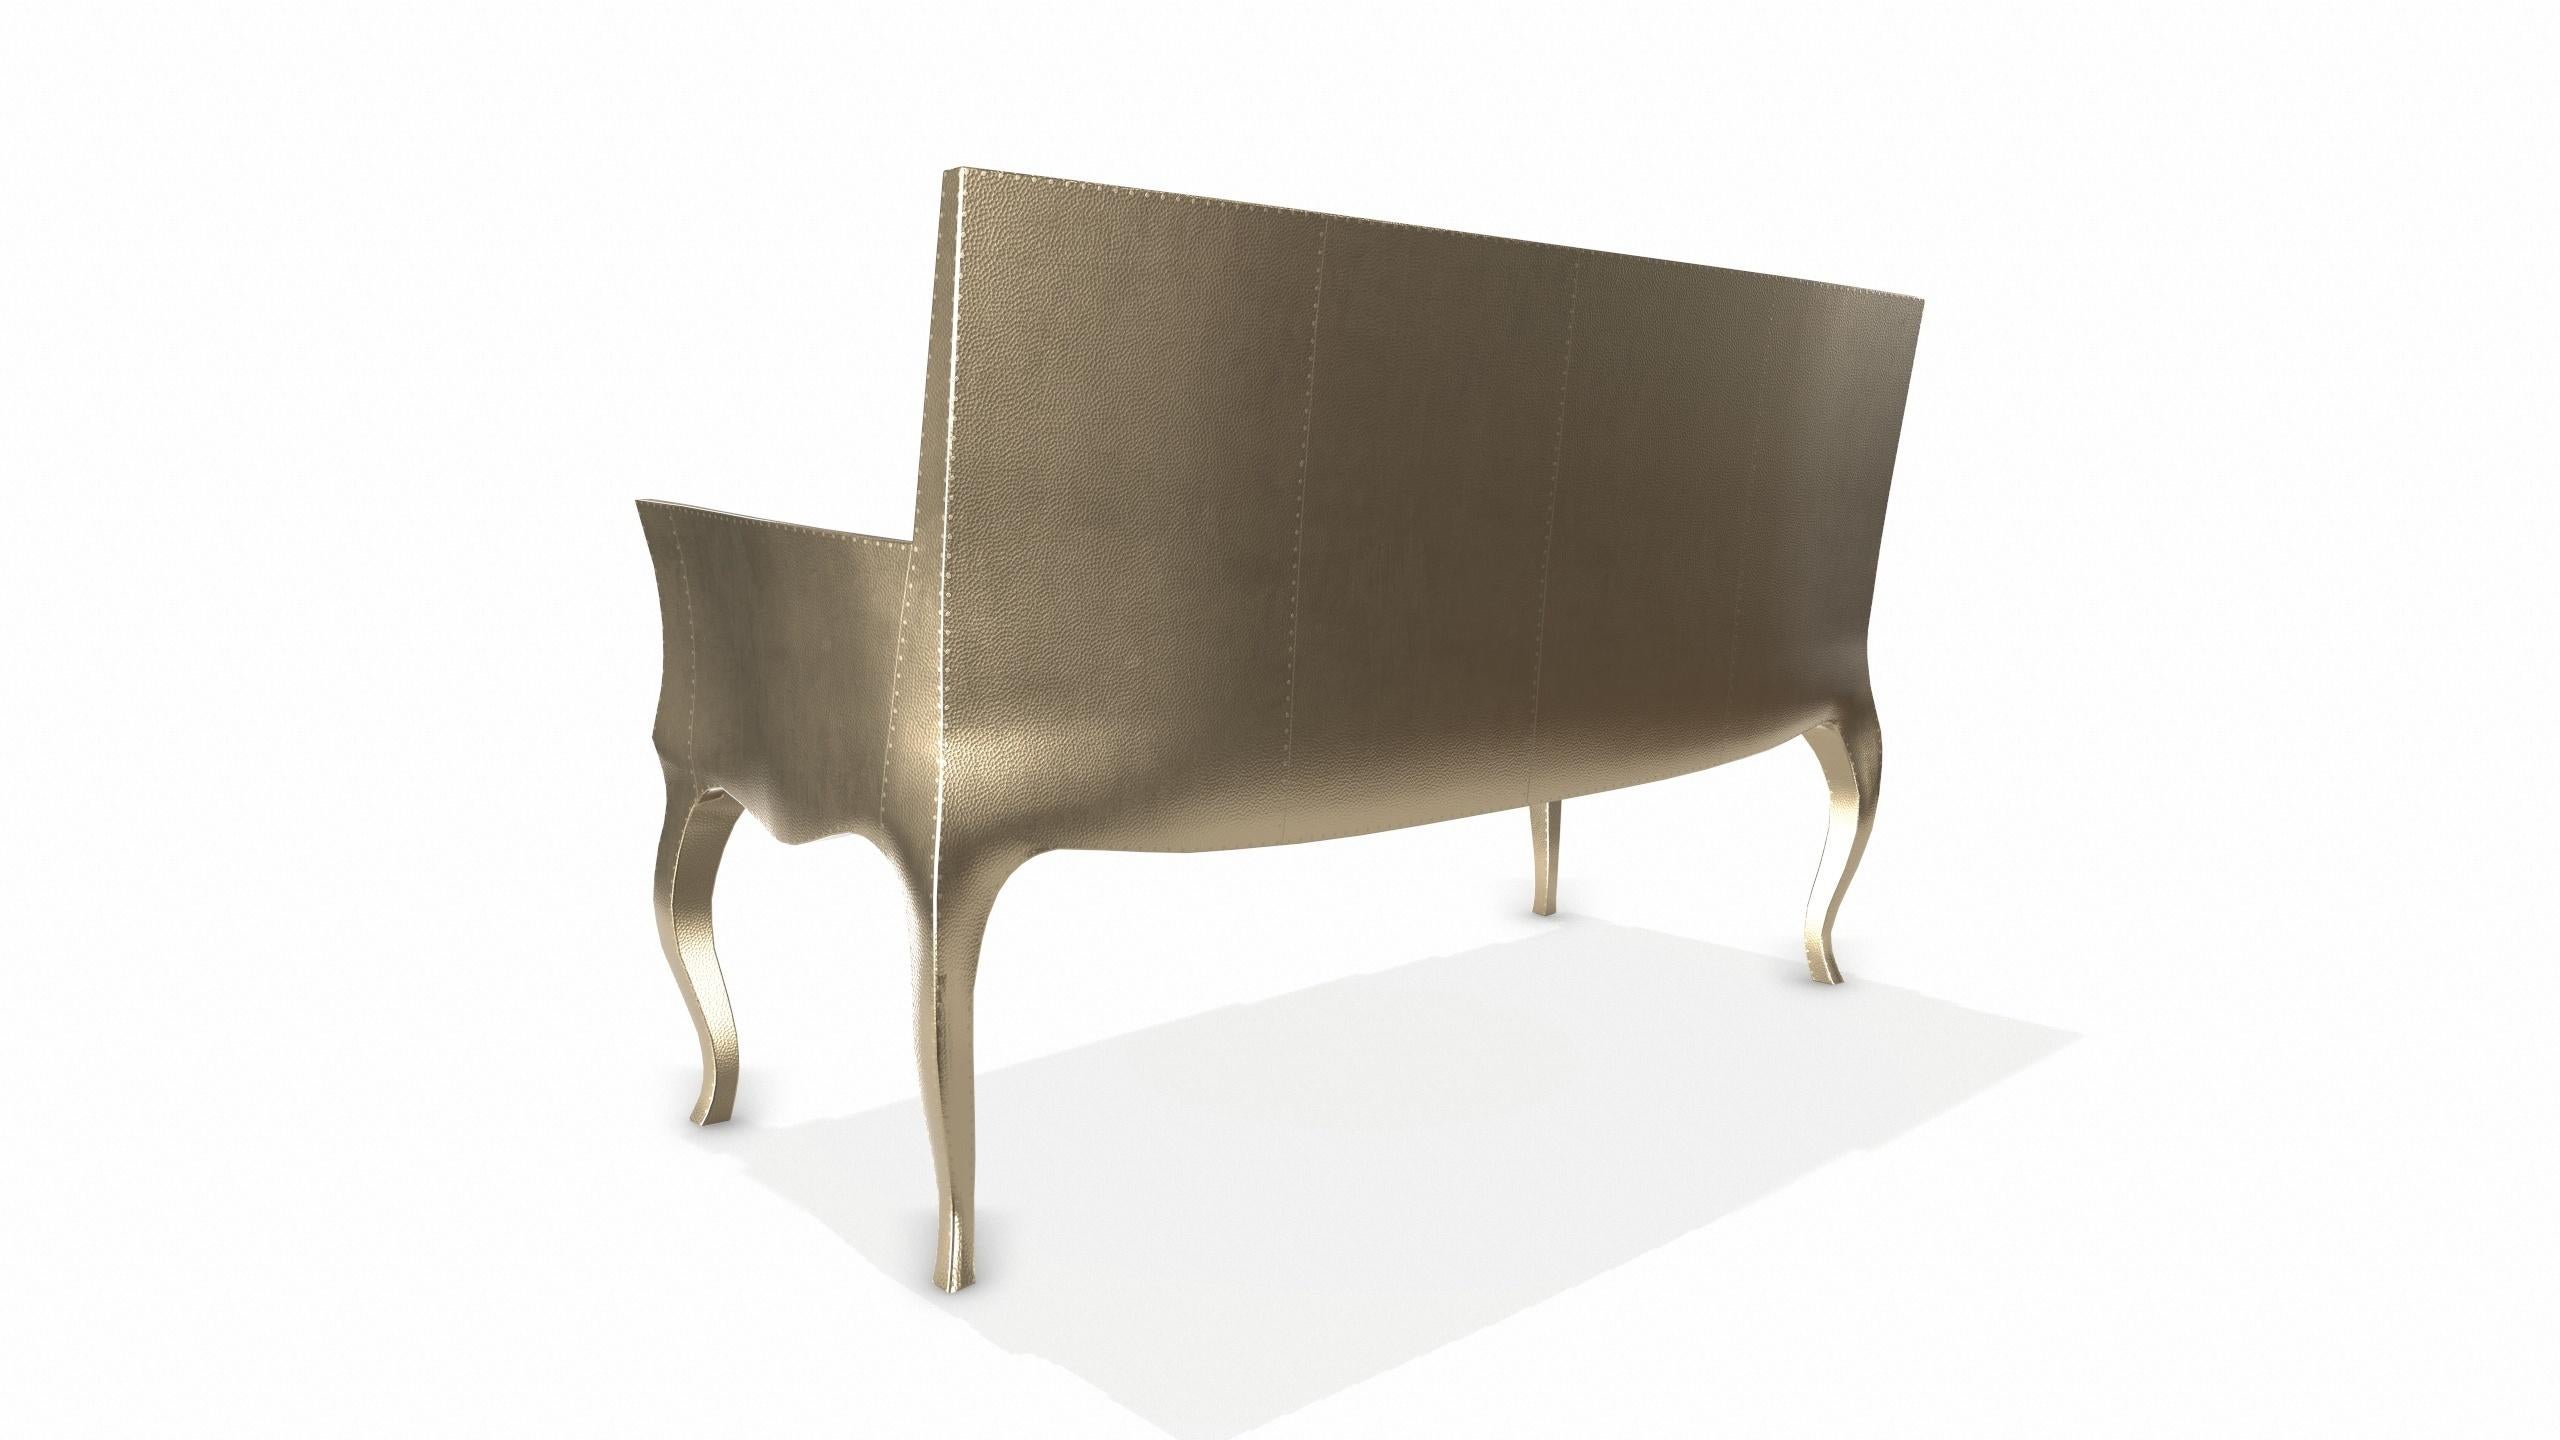 Louise Settee Art Deco Lounge Chairs in Mid. Hammered Brass by Paul Mathieu For Sale 1